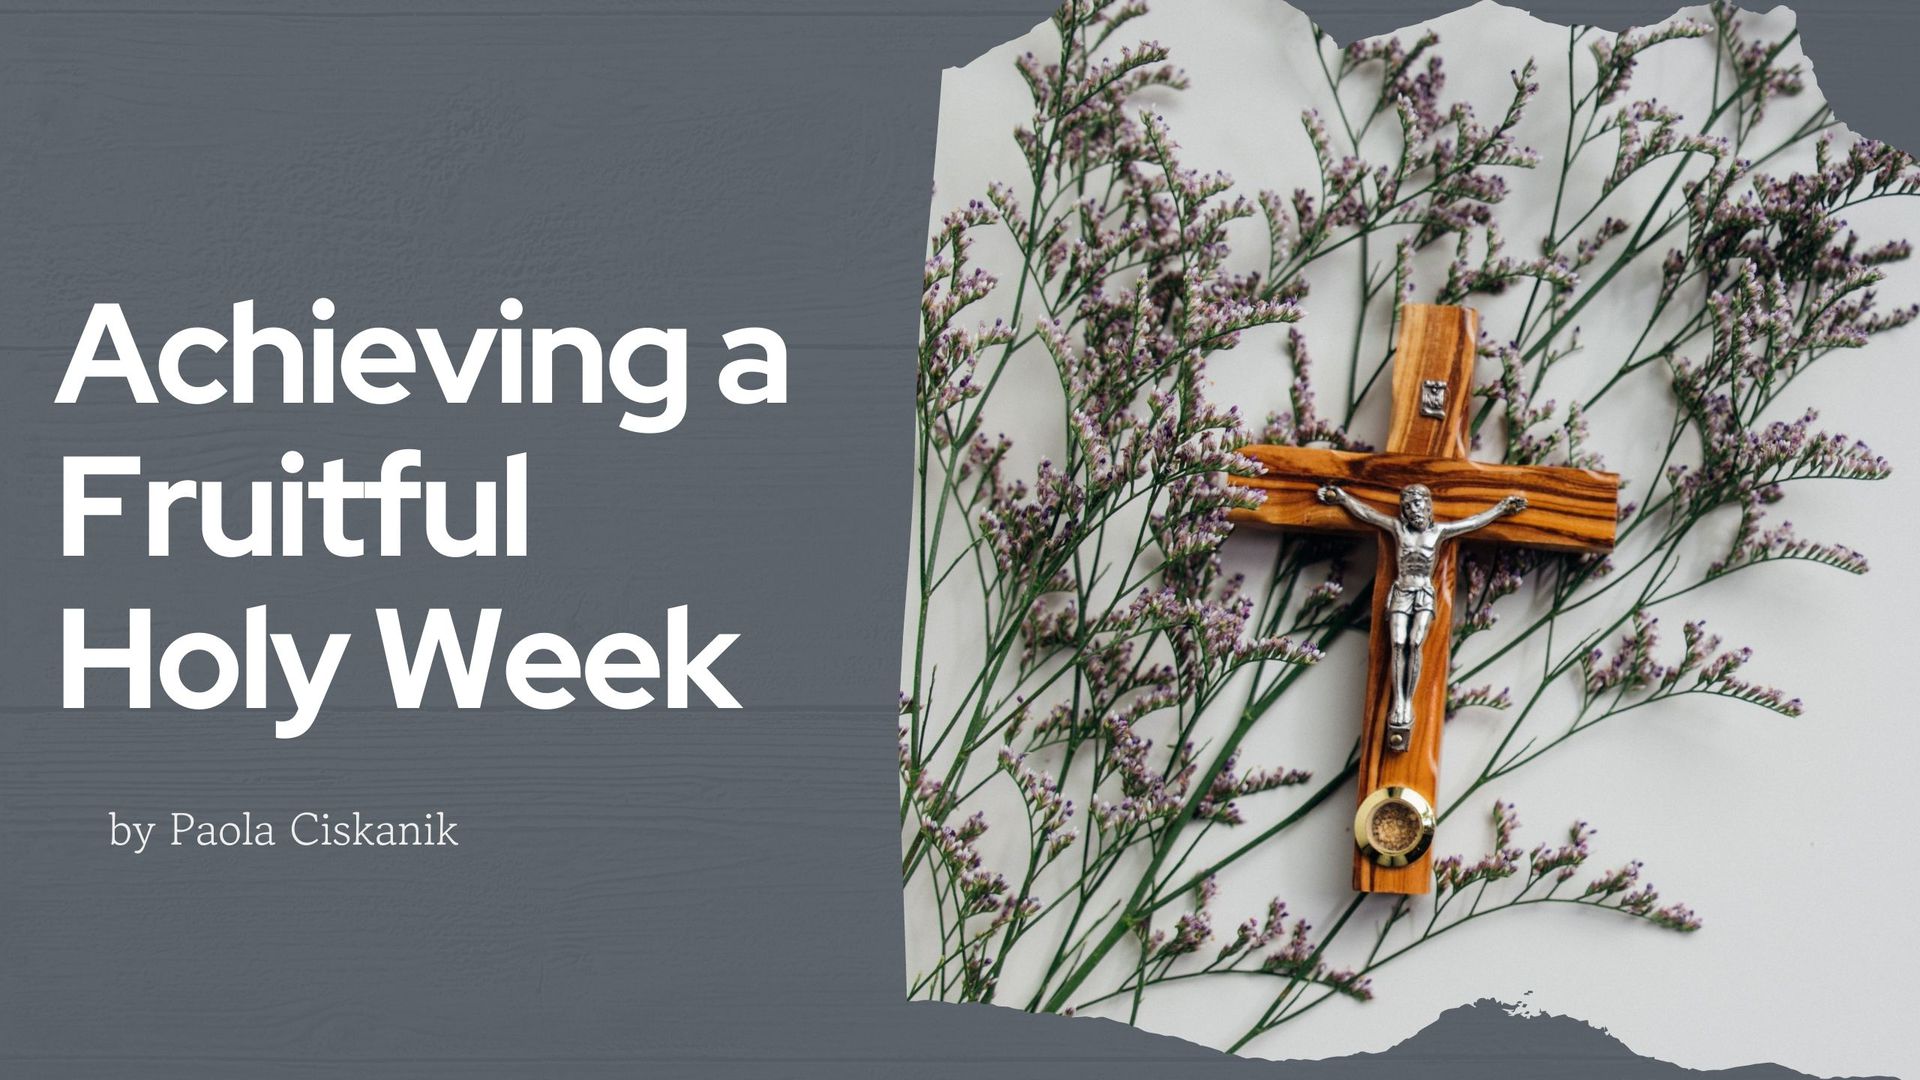 Achieving a Fruitful Holy Week